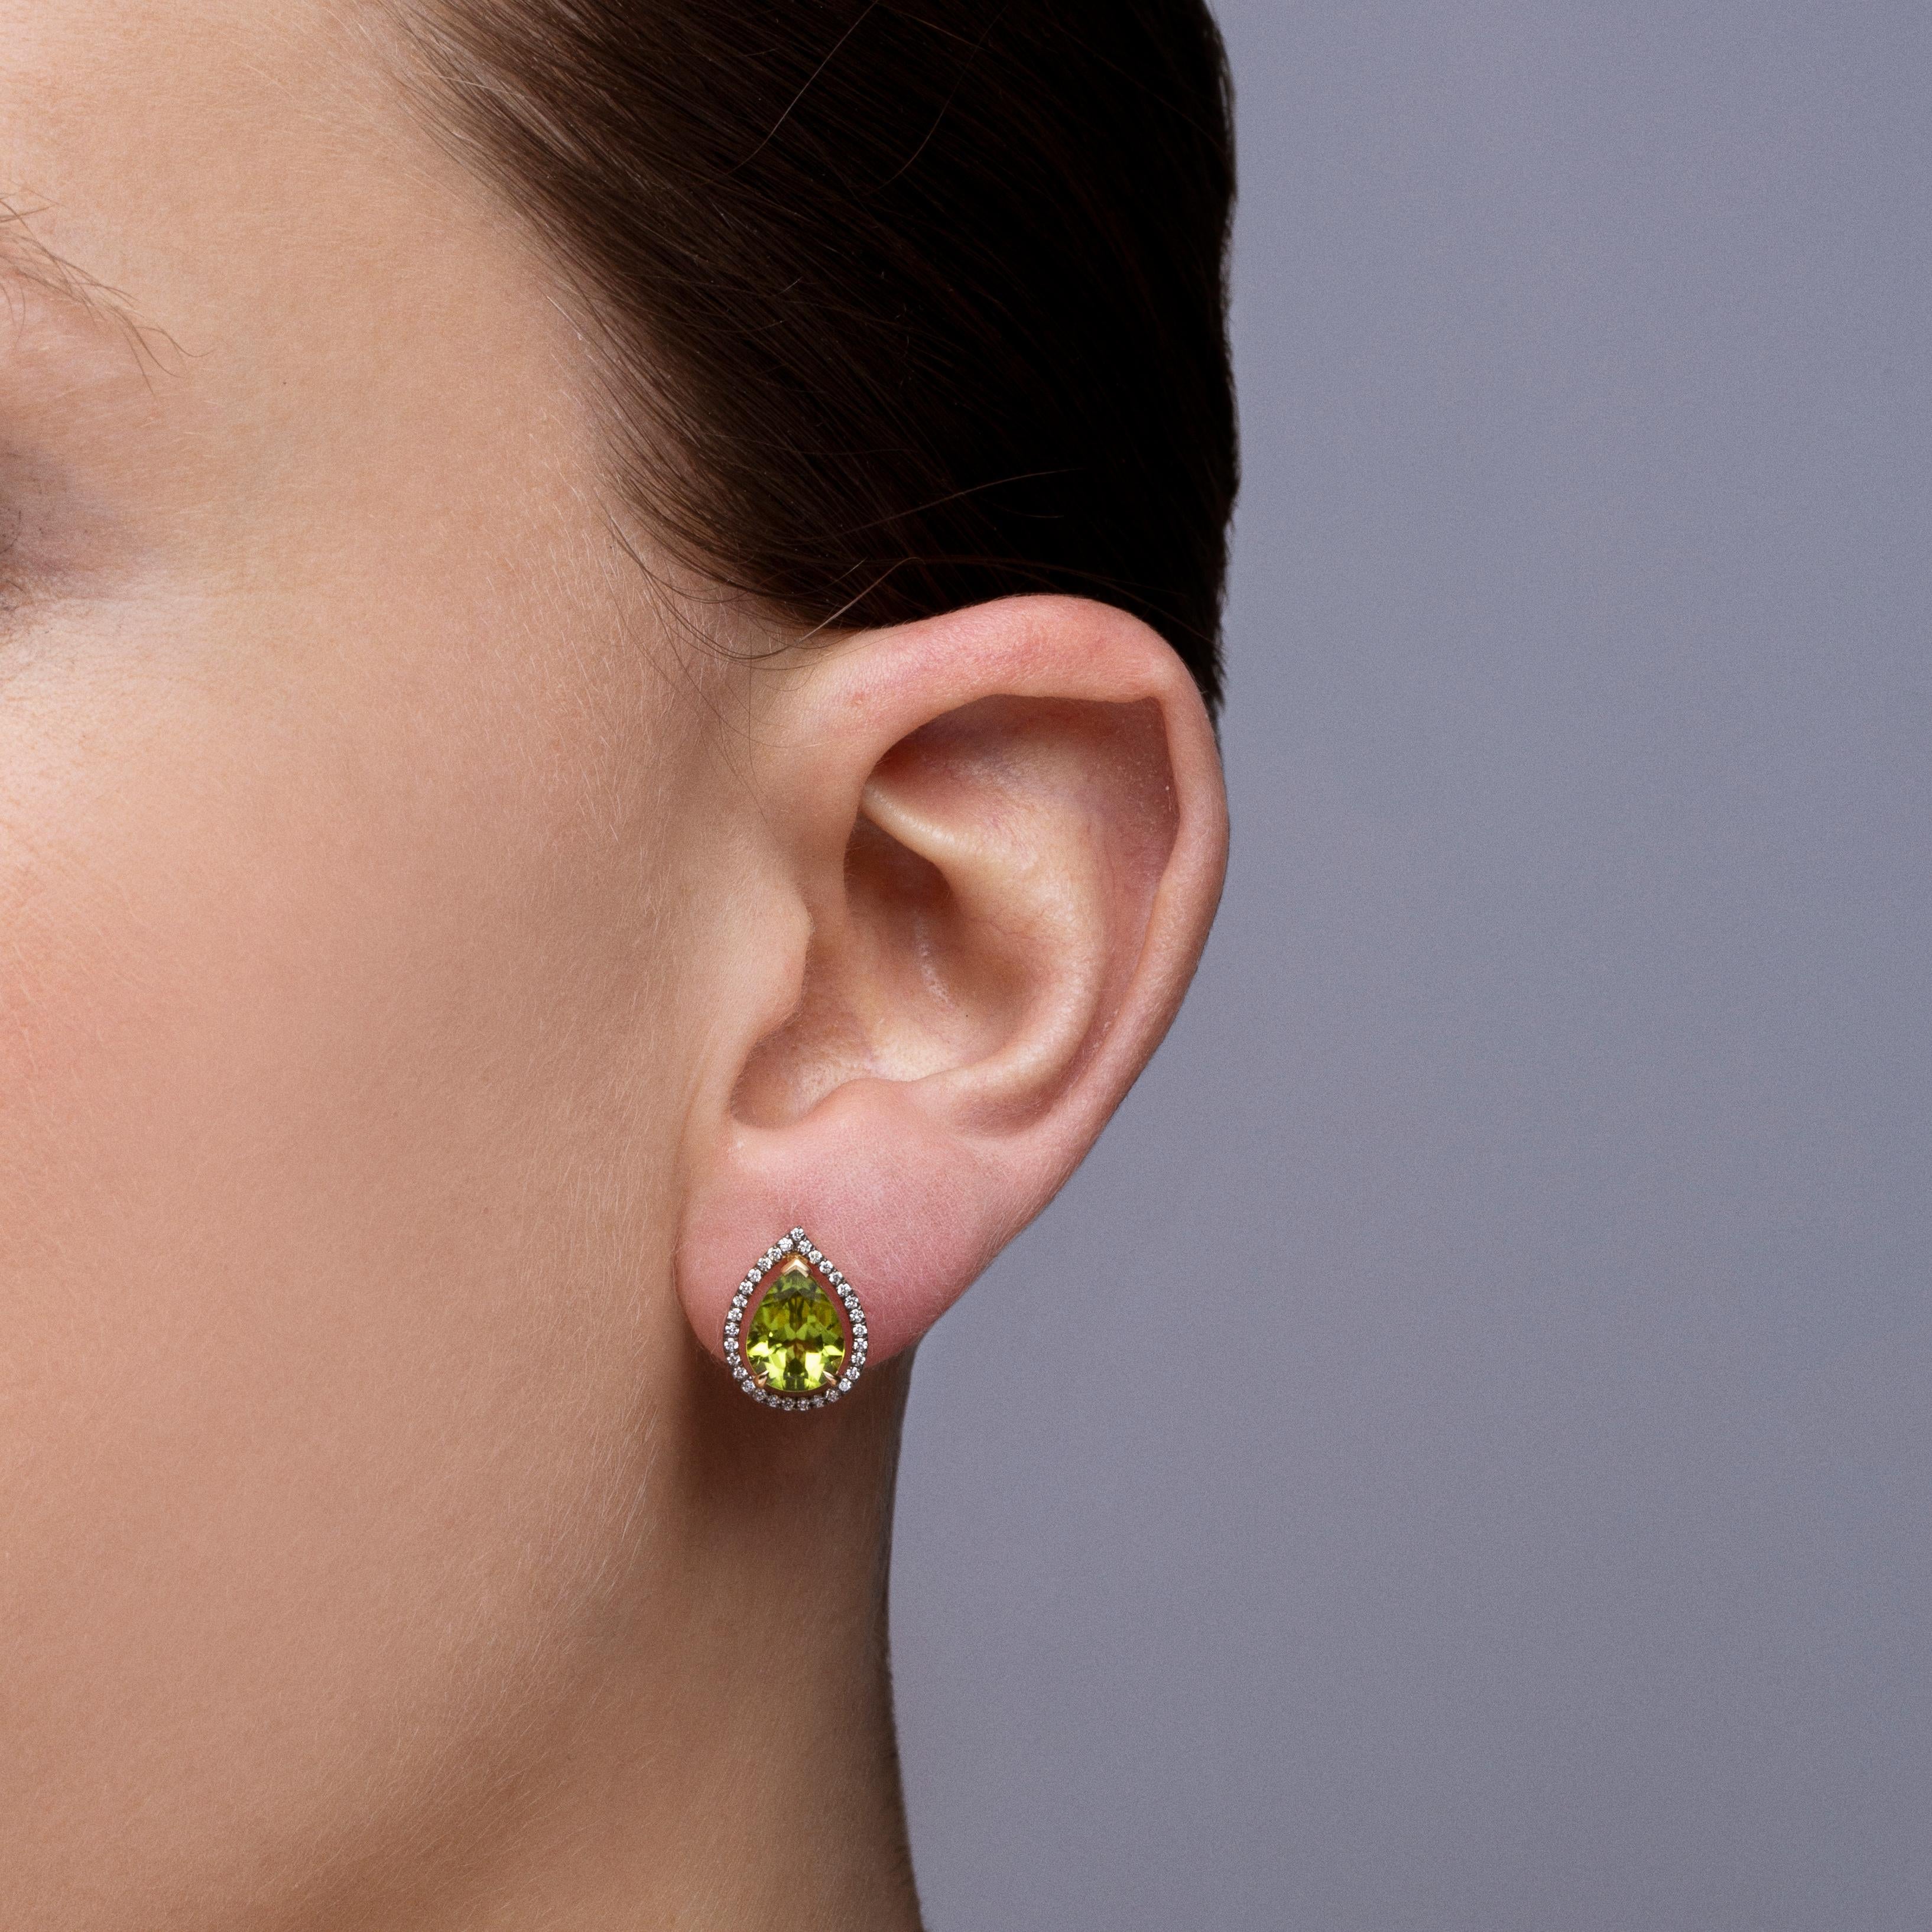 Alex Jona design collection, hand crafted in Italy, 18 karat yellow gold stud earrings set with two pear cut  peridots weighing 3.41 carats, surrounded by 0,22 carats of brilliant cut white diamonds, F color, VVS1 clarity.
Dimensions : H